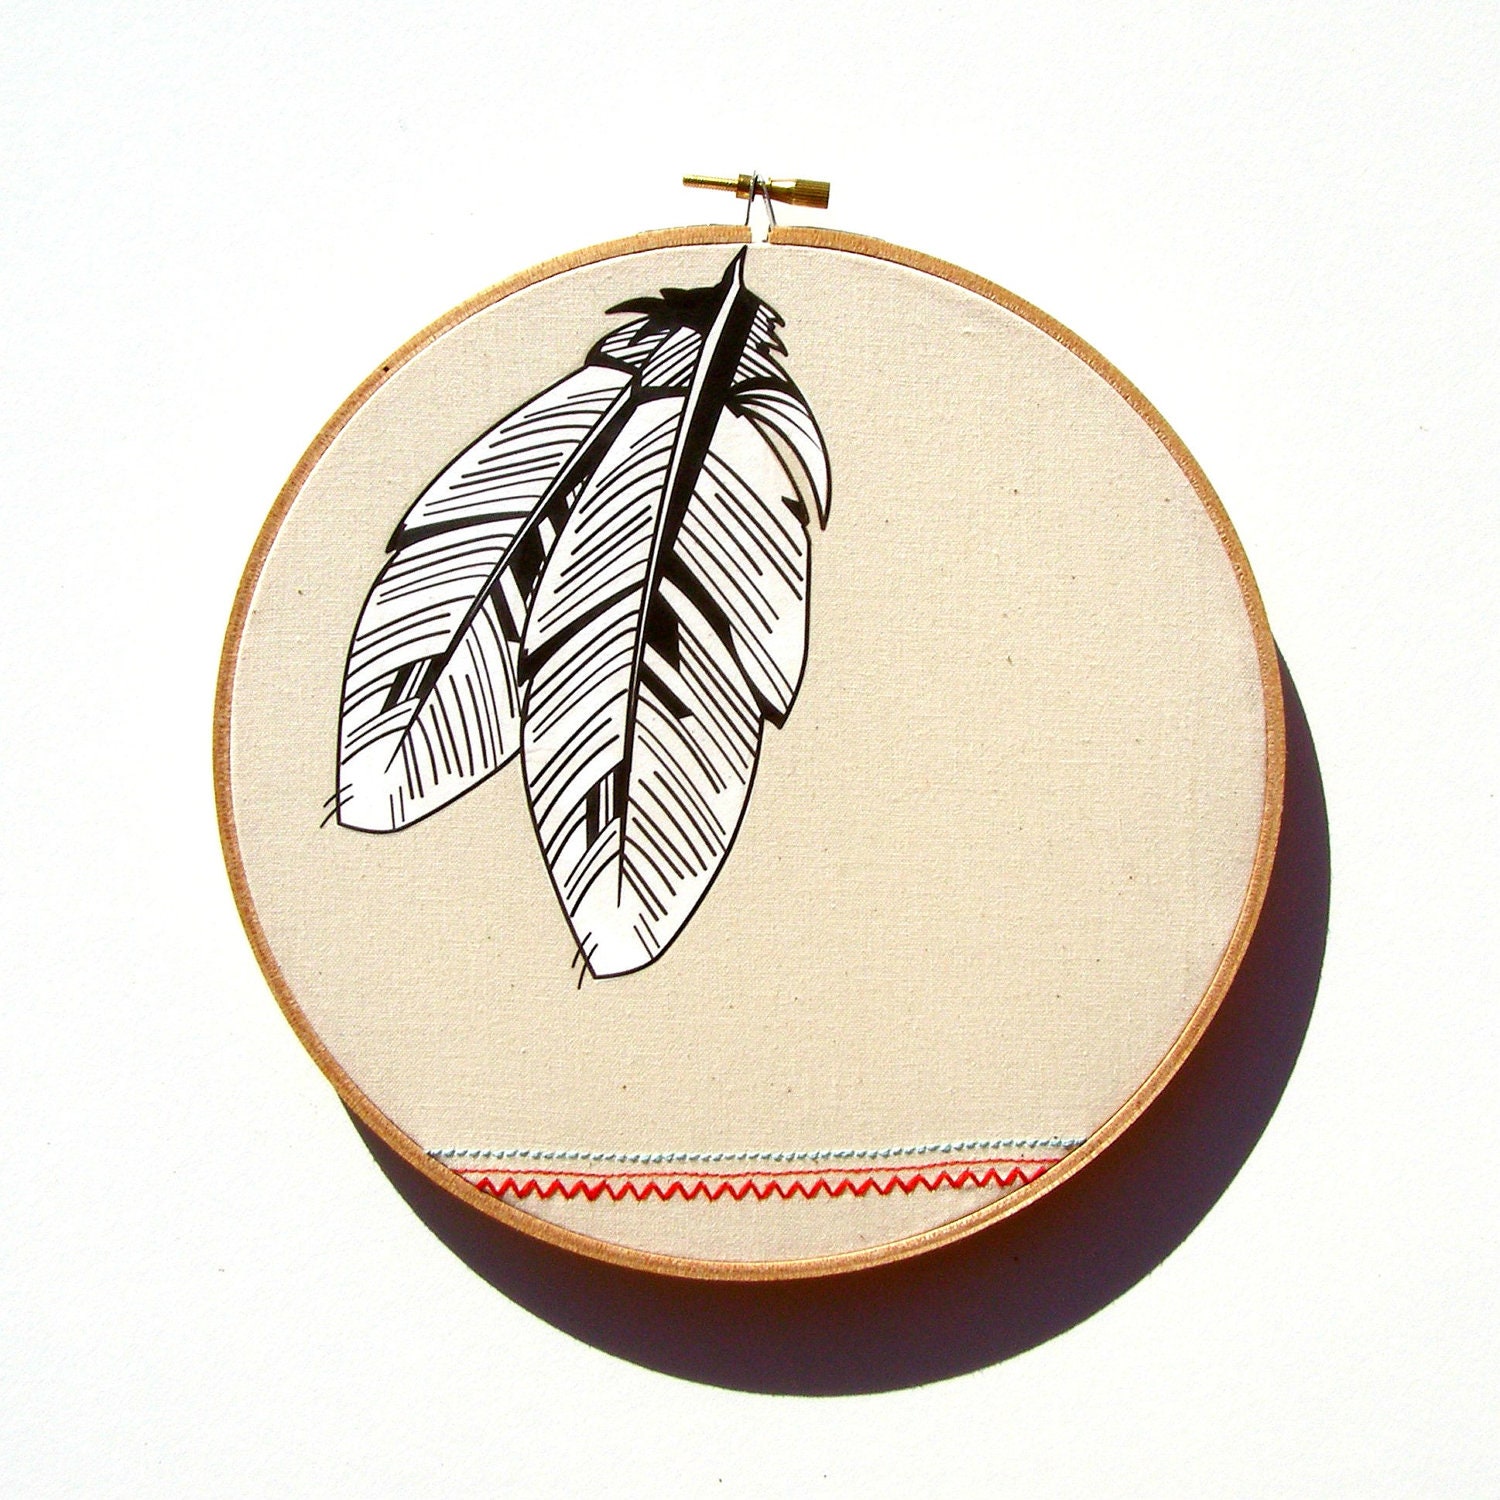 Two Feathers Hoop Art - print of original illustration on fabric with native / tribal inspired stitching detail